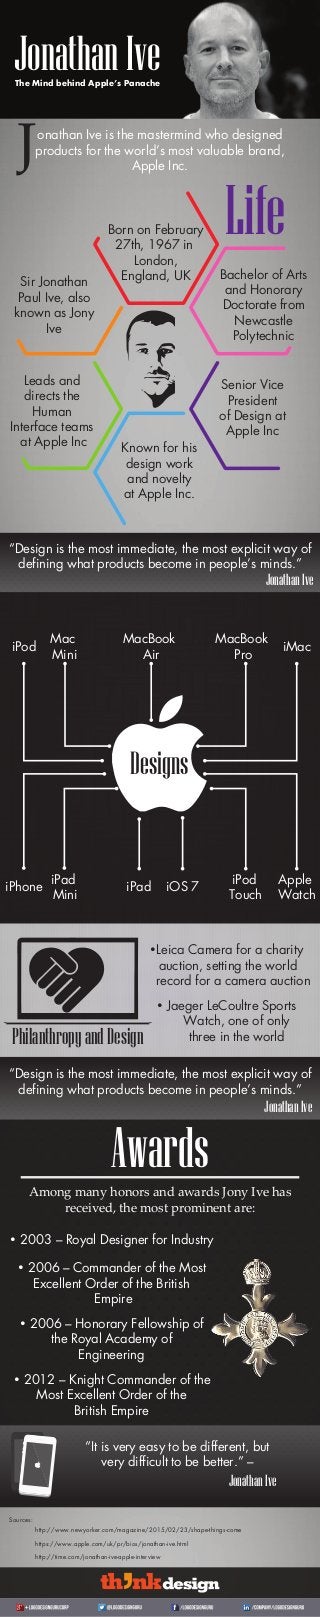 Knownforhisdesign
workandnoveltyat
AppleInc.
onathan Ive is the mastermind who designed
products for the world’s most valuable brand,
Apple Inc.J
MacBook
Pro
iMac
MacBook
Air
Mac
Mini
iPod
iPod
Touch
iPhone iPad
iPad
Mini
Apple
Watch
iOS 7
•Leica Camera for a charity
auction, setting the world
record for a camera auction
• Jaeger LeCoultre Sports
Watch, one of only
three in the worldPhilanthropyandDesign
Awards
Among many honors and awards Jony Ive has
received, the most prominent are:
Designs
Life
Sir Jonathan
Paul Ive, also
known as Jony
Ive
Born on February
27th, 1967 in
London,
England, UK
Leads and
directs the
Human
Interface teams
at Apple Inc
Senior Vice
President
of Design at
Apple Inc
Known for his
design work
and novelty
at Apple Inc.
Bachelor of Arts
and Honorary
Doctorate from
Newcastle
Polytechnic
• 2003 – Royal Designer for Industry
• 2006 – Commander of the Most
Excellent Order of the British
Empire
• 2006 – Honorary Fellowship of
the Royal Academy of
Engineering
• 2012 – Knight Commander of the
Most Excellent Order of the
British Empire
JonathanIveThe Mind behind Apple’s Panache
JonathanIve
“Design is the most immediate, the most explicit way of
defining what products become in people’s minds.”
JonathanIve
“Design is the most immediate, the most explicit way of
defining what products become in people’s minds.”
Sources:
http://www.newyorker.com/magazine/2015/02/23/shape-things-come
https://www.apple.com/uk/pr/bios/jonathan-ive.html
http://time.com/jonathan-ive-apple-interview
JonathanIve
“It is very easy to be different, but
very difficult to be better.” –
 